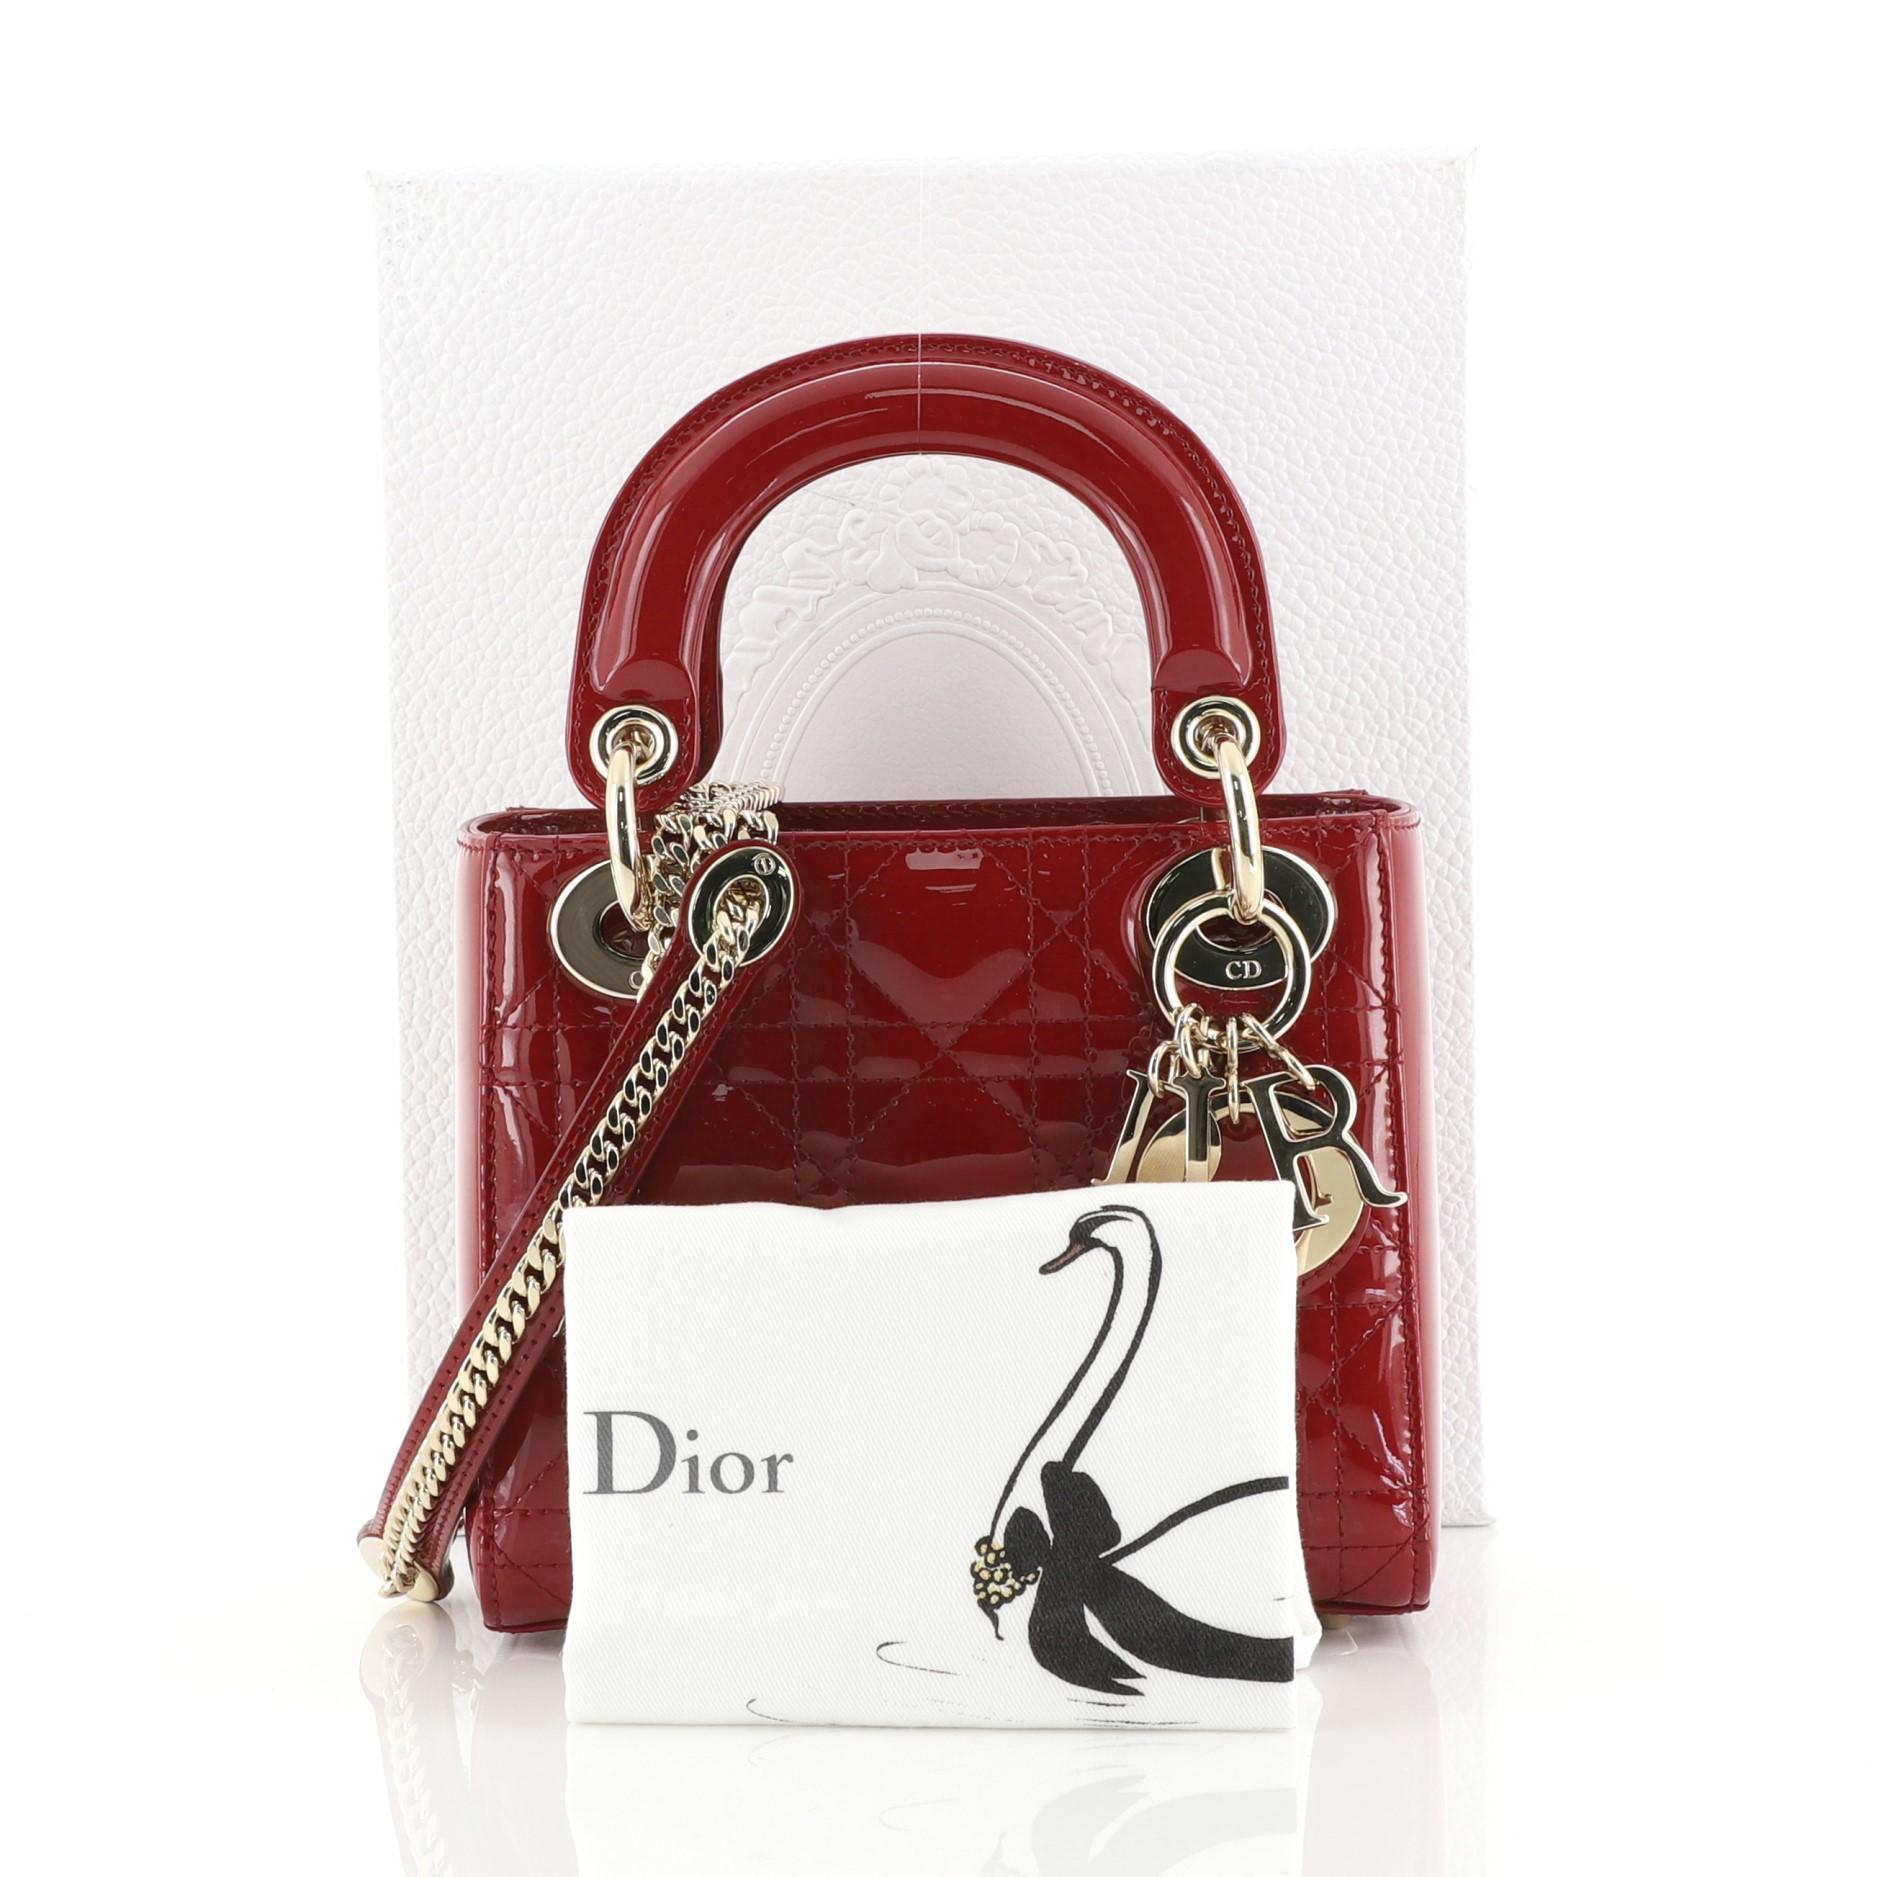 This Christian Dior Lady Dior Chain Bag Cannage Quilt Patent Mini, crafted in red cannage quilted patent leather, features dual top leather handles, detachable chain link strap, protective base studs, and gold-tone hardware. It opens to a red fabric